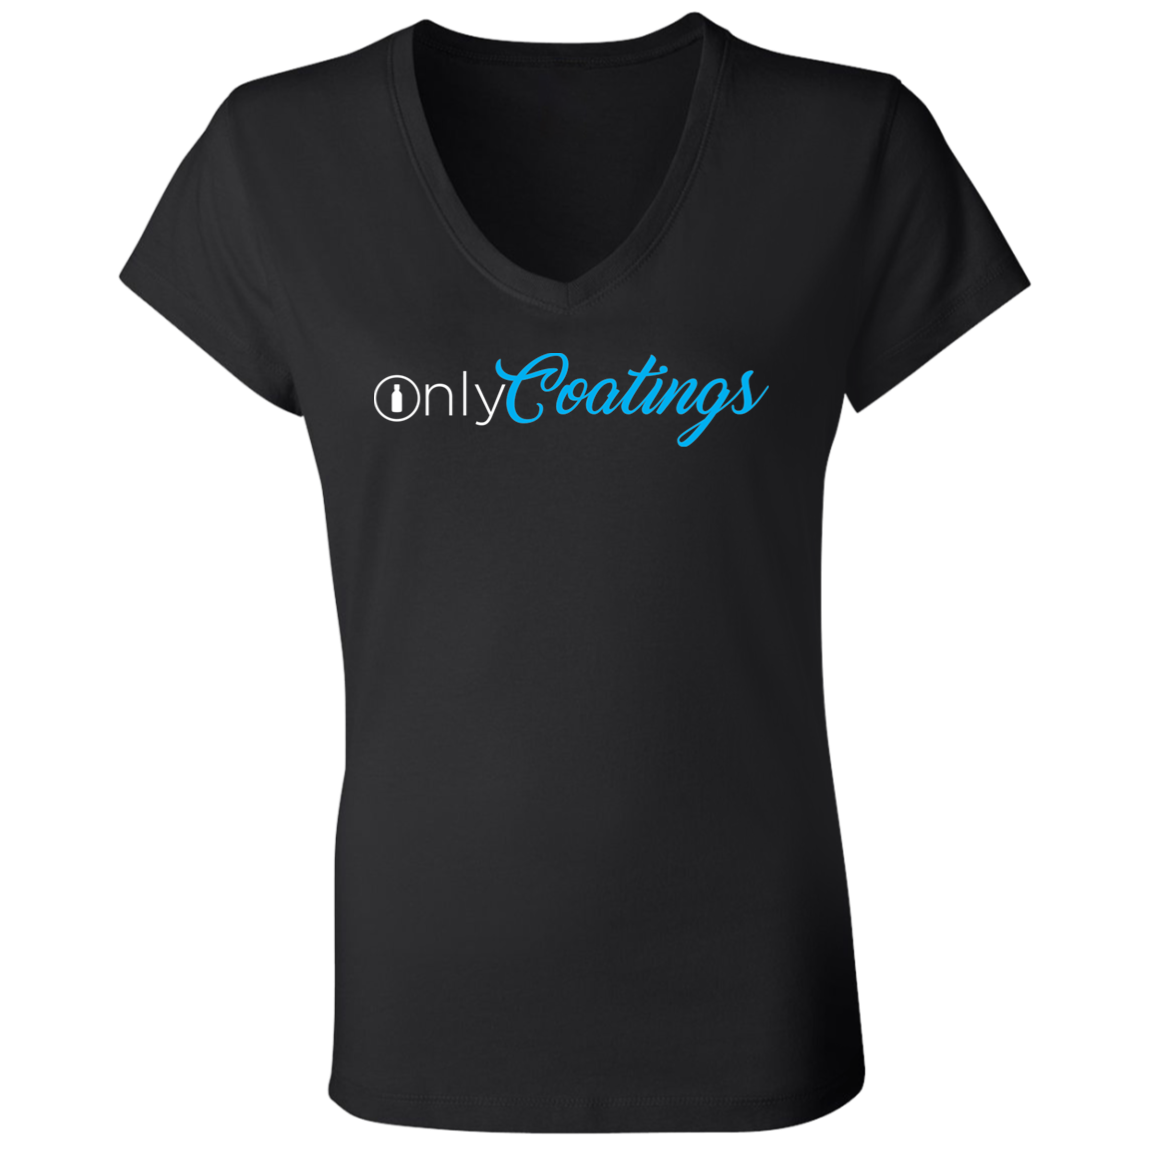 OnlyCoatings Ladies' Jersey V-Neck T-Shirt